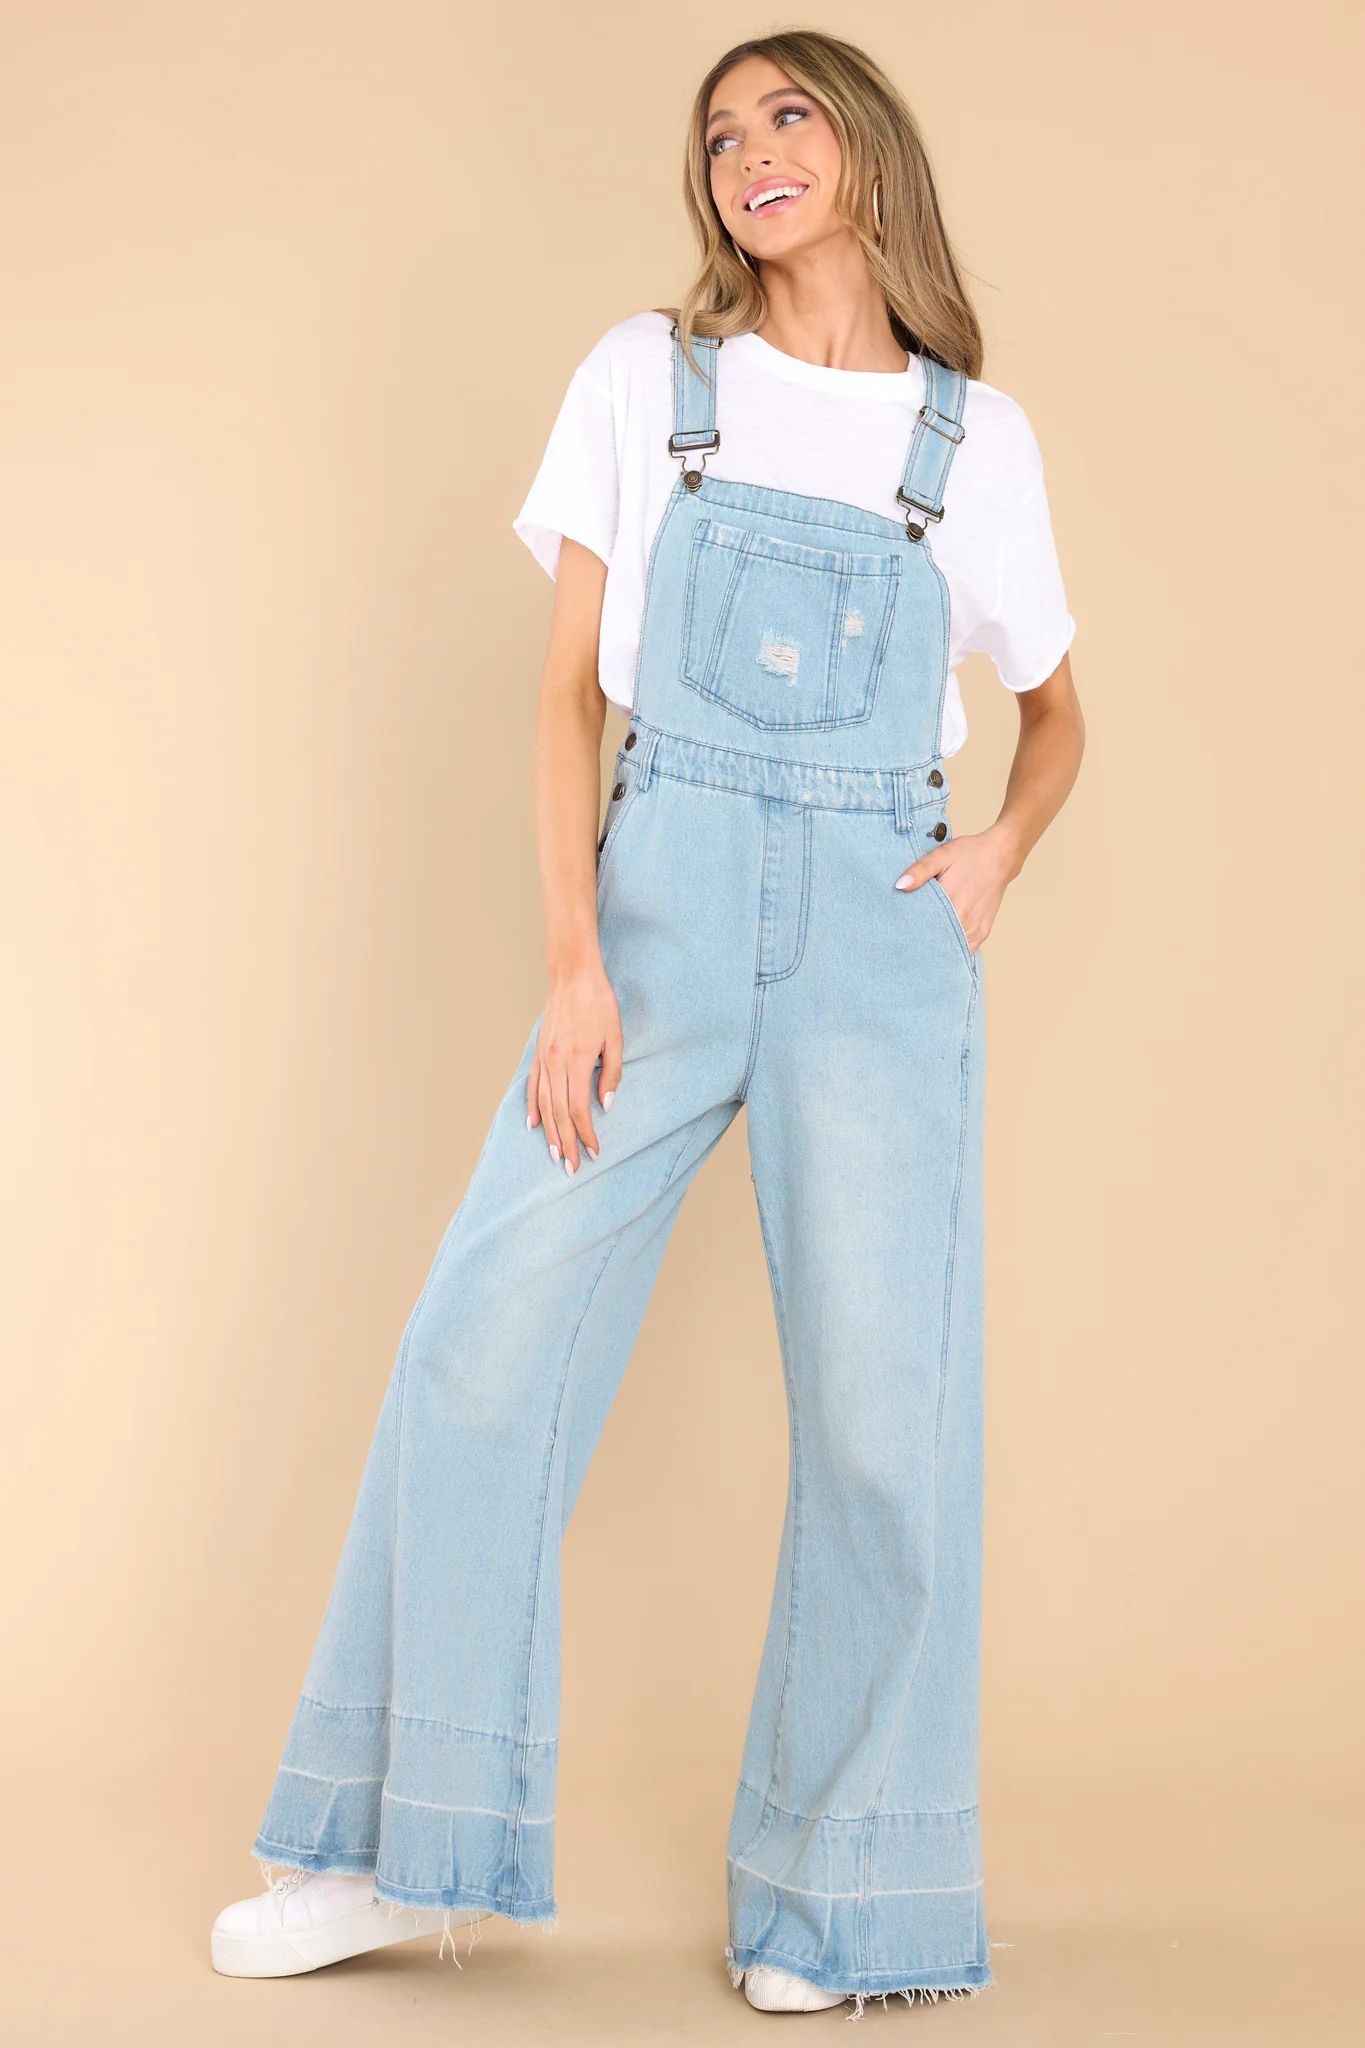 Up And Away Denim Overalls | Red Dress 